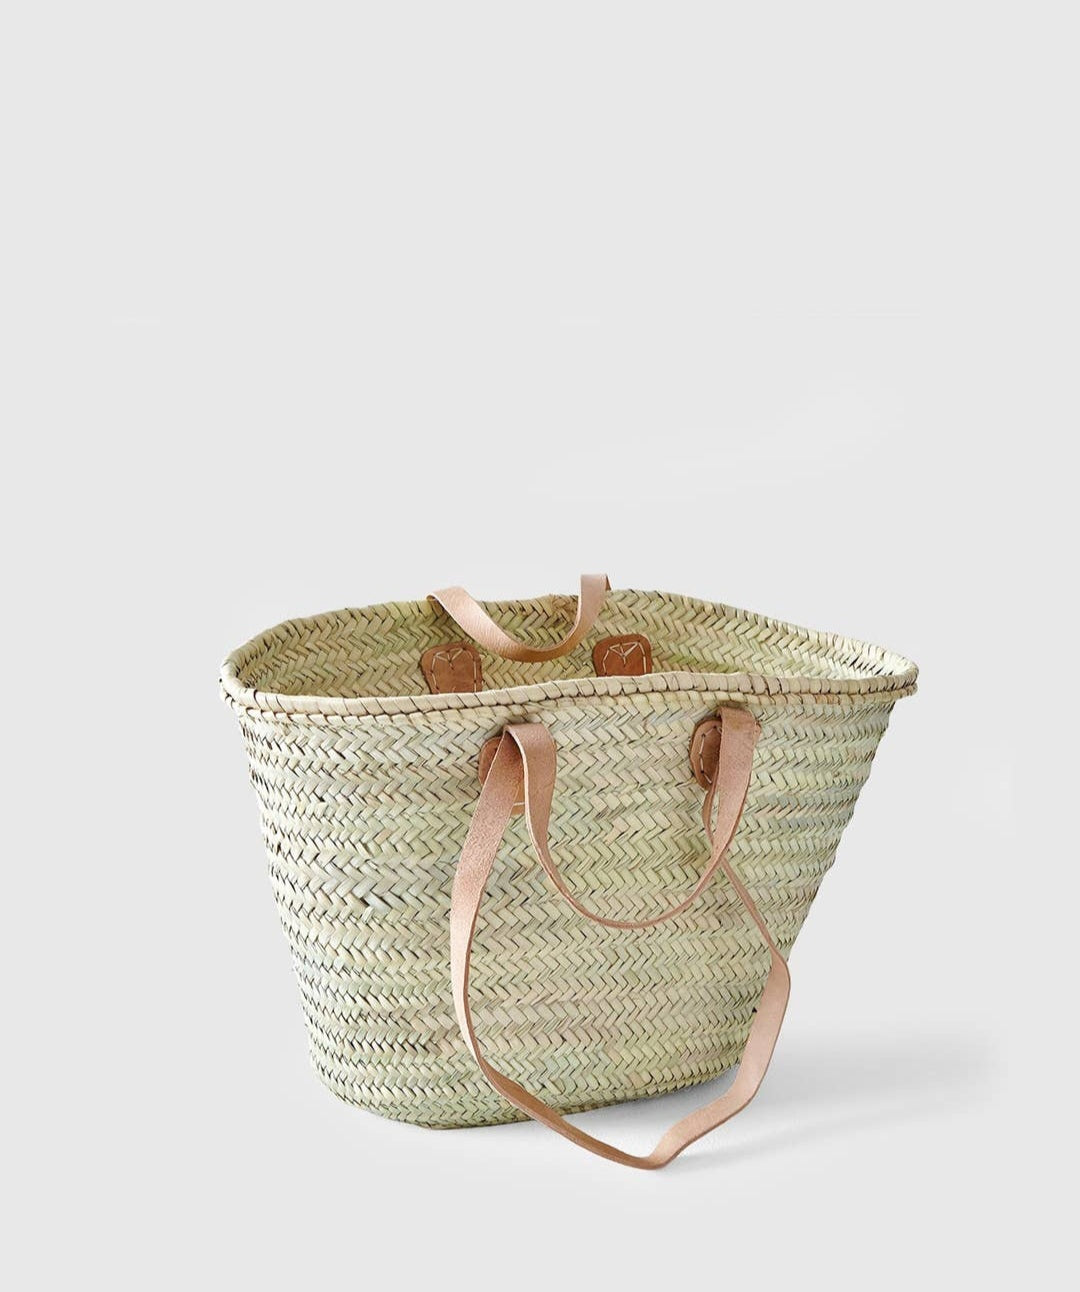 classic French market bag